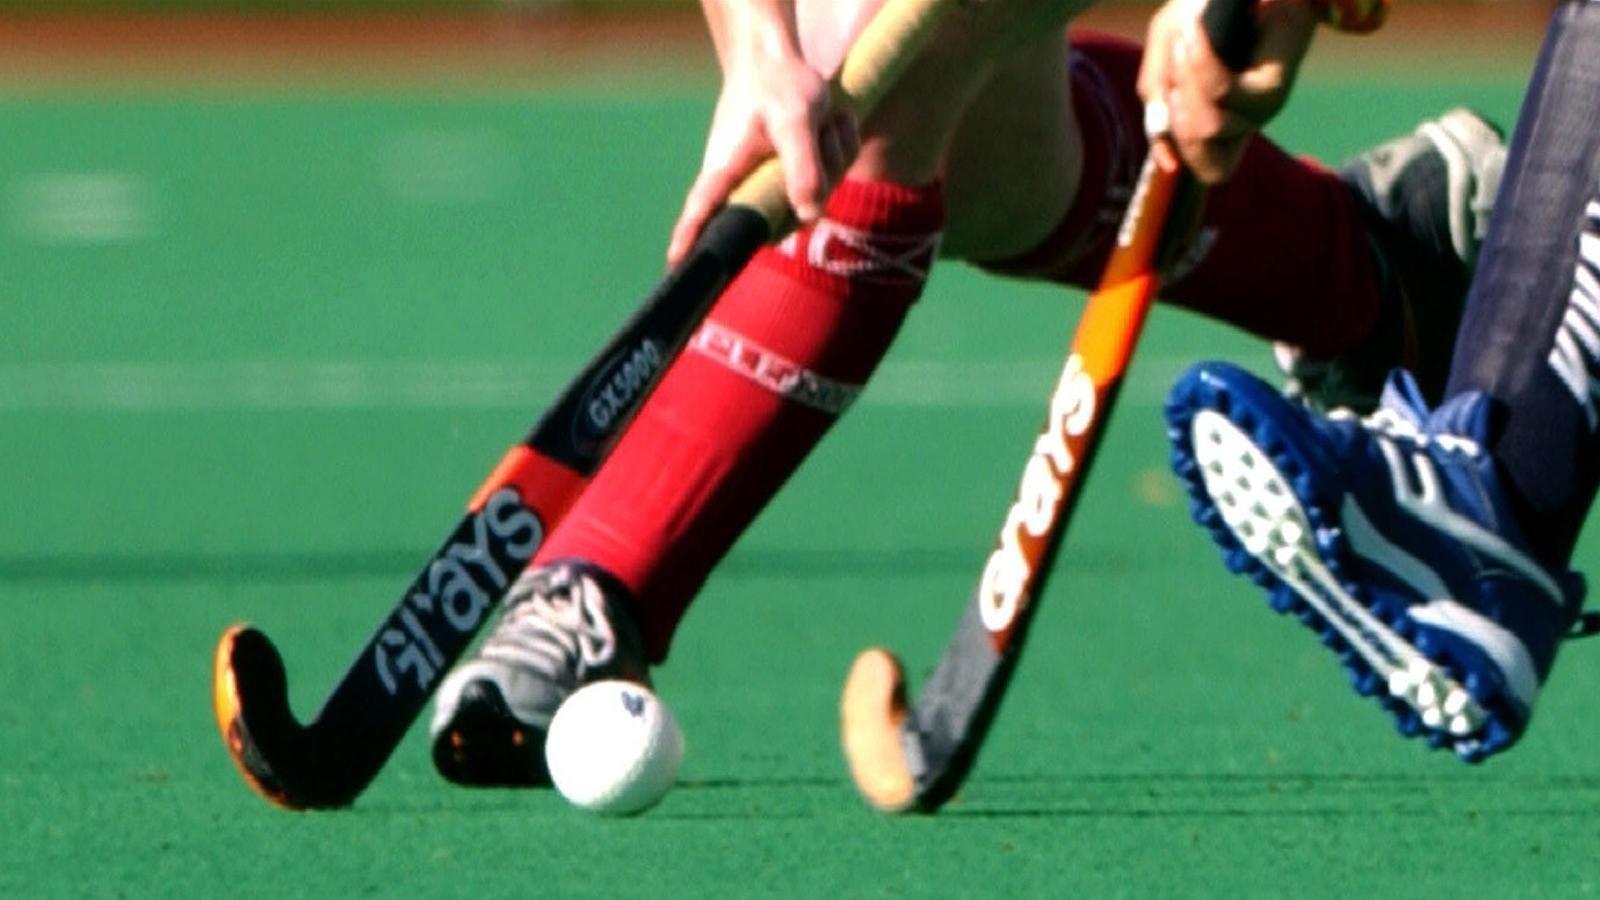 Hockey player in coma after being hit